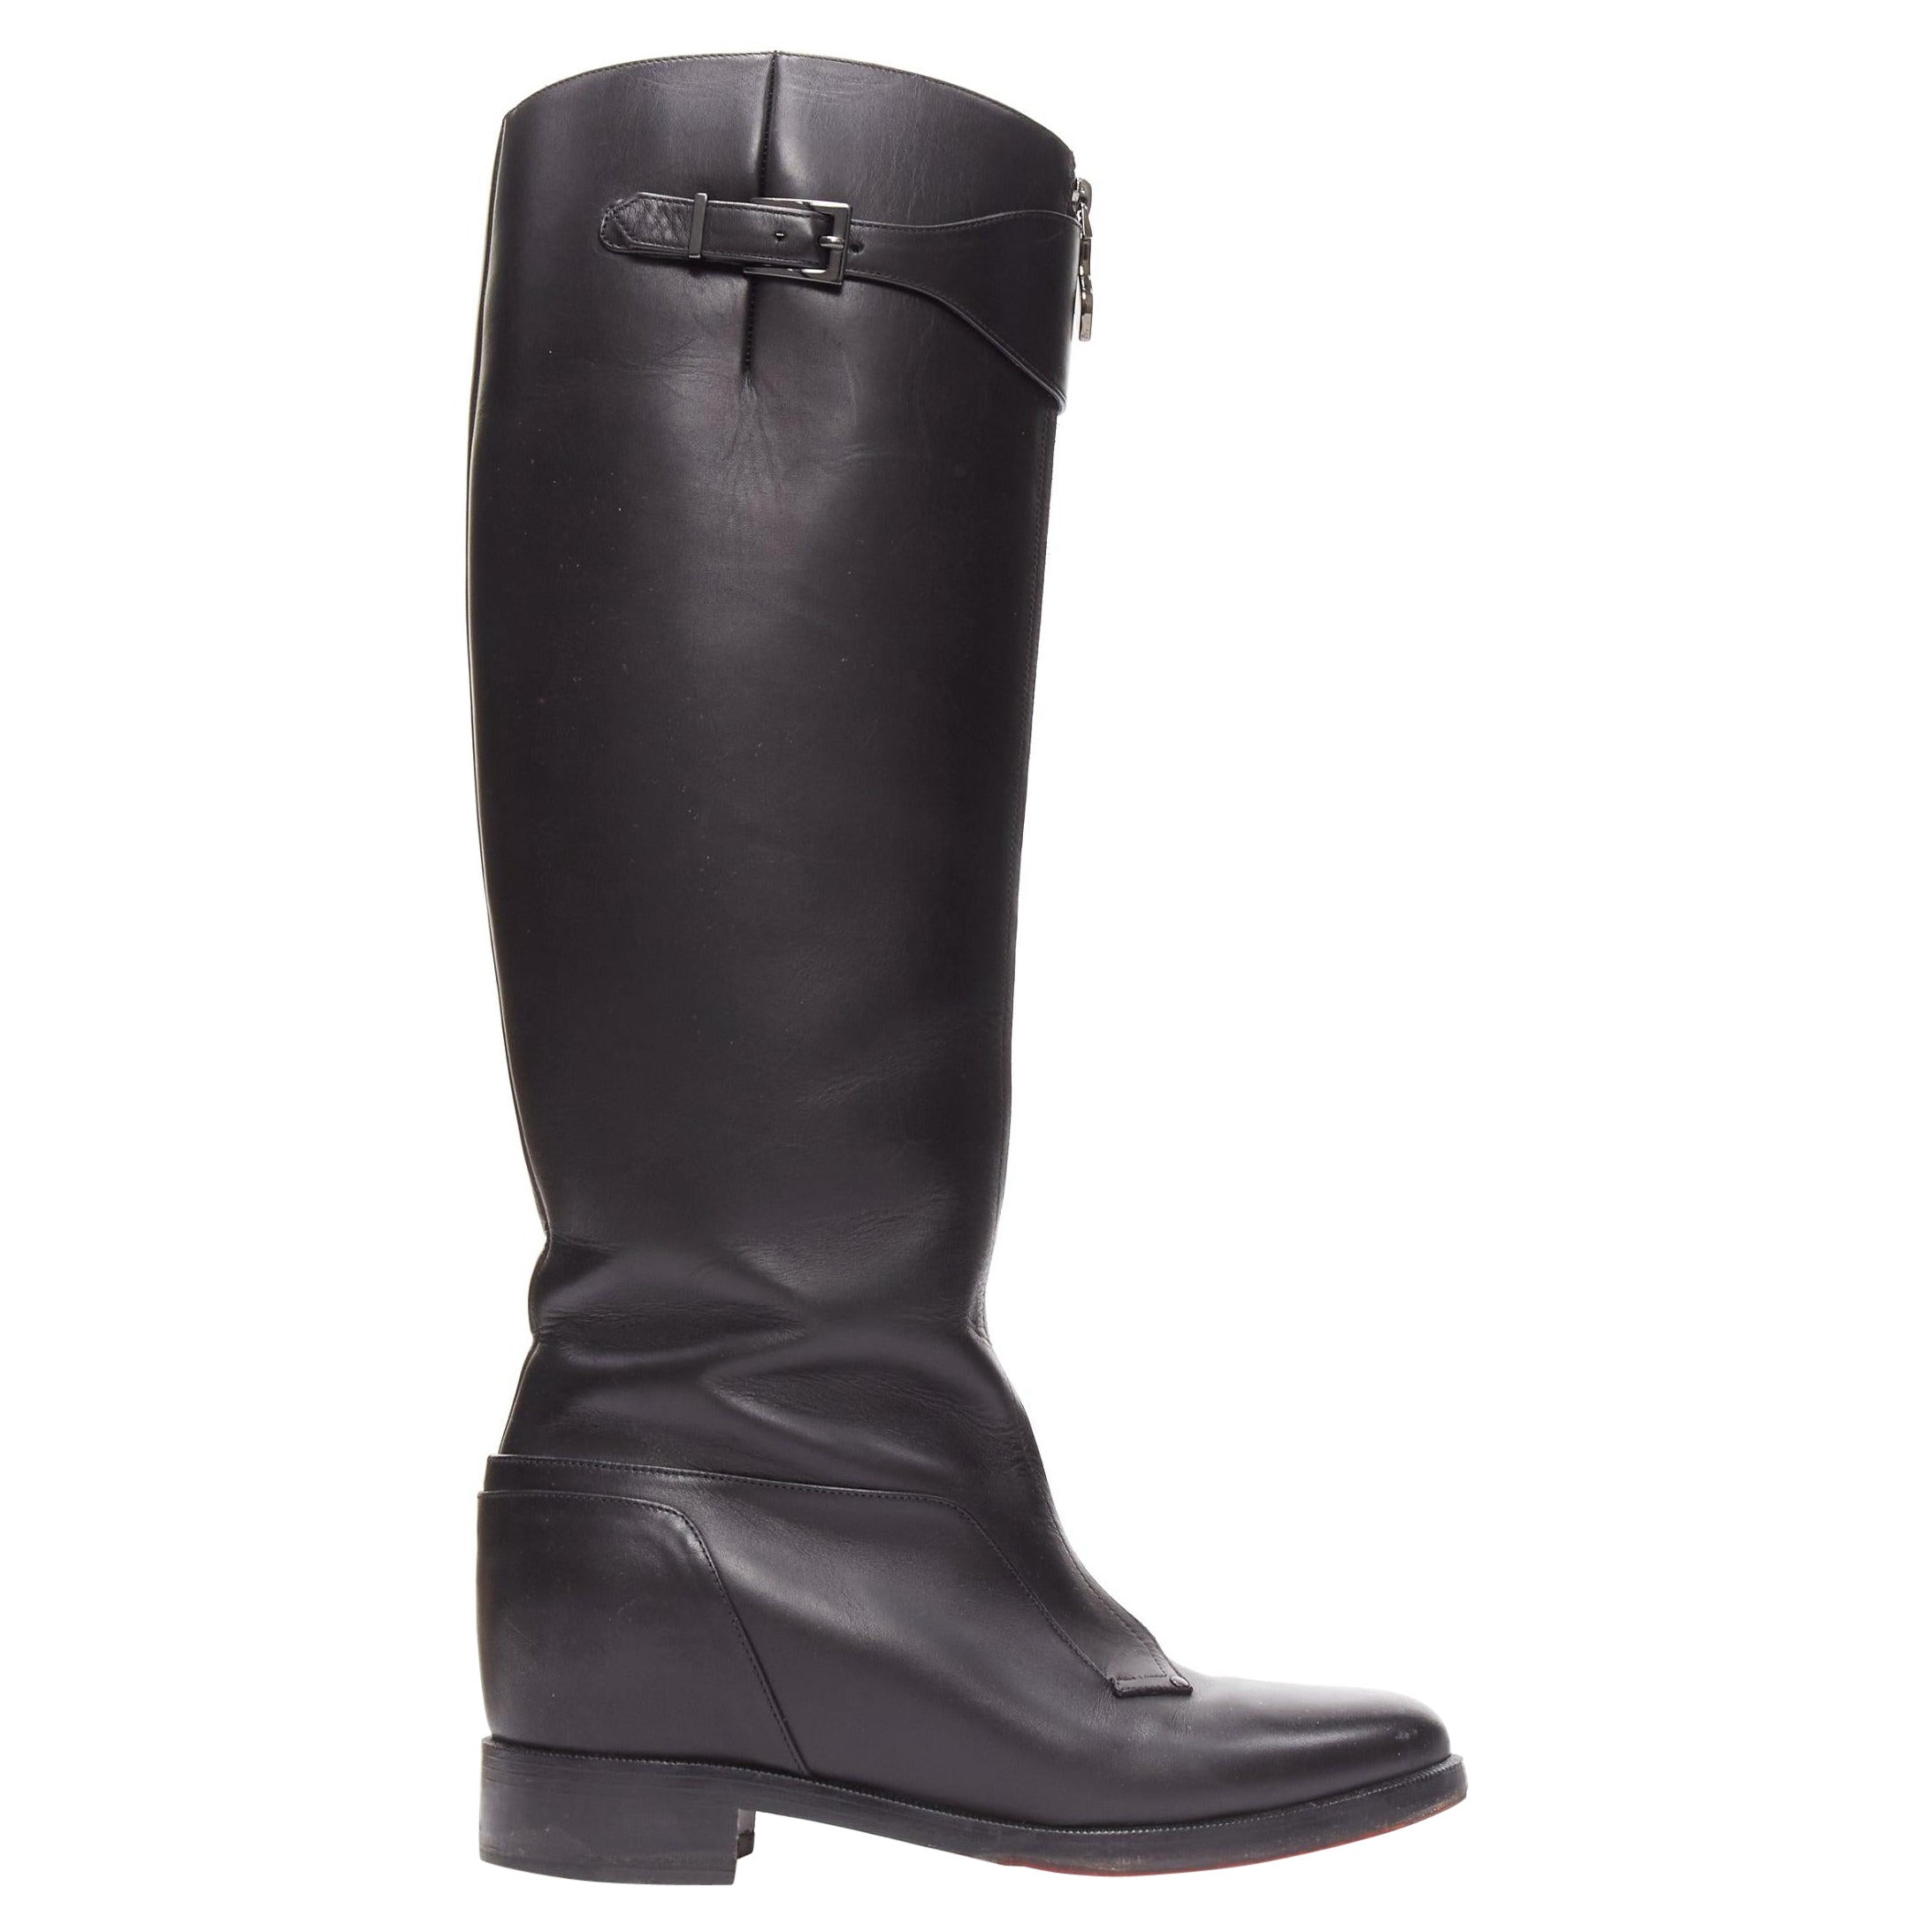 CHRISTIAN LOUBOUTIN black leather zip front concealed wedge riding boot EU40 For Sale